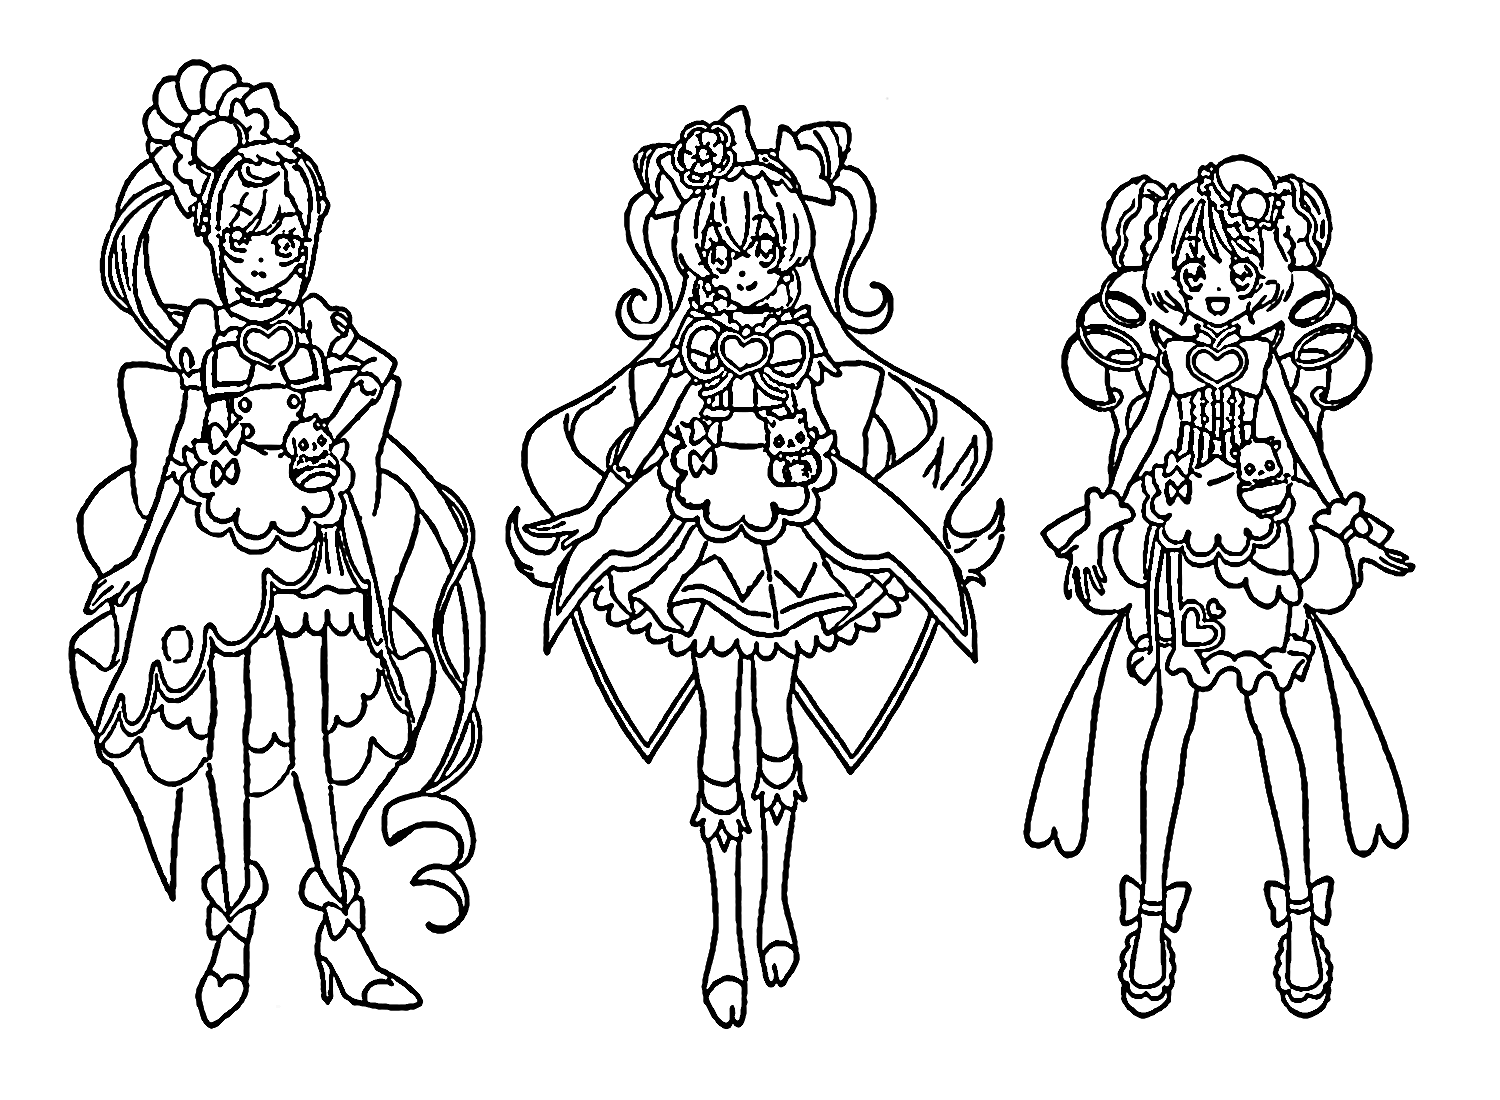 Cure Spicy, Cure Precious, Cure Yum Yum Coloring Page